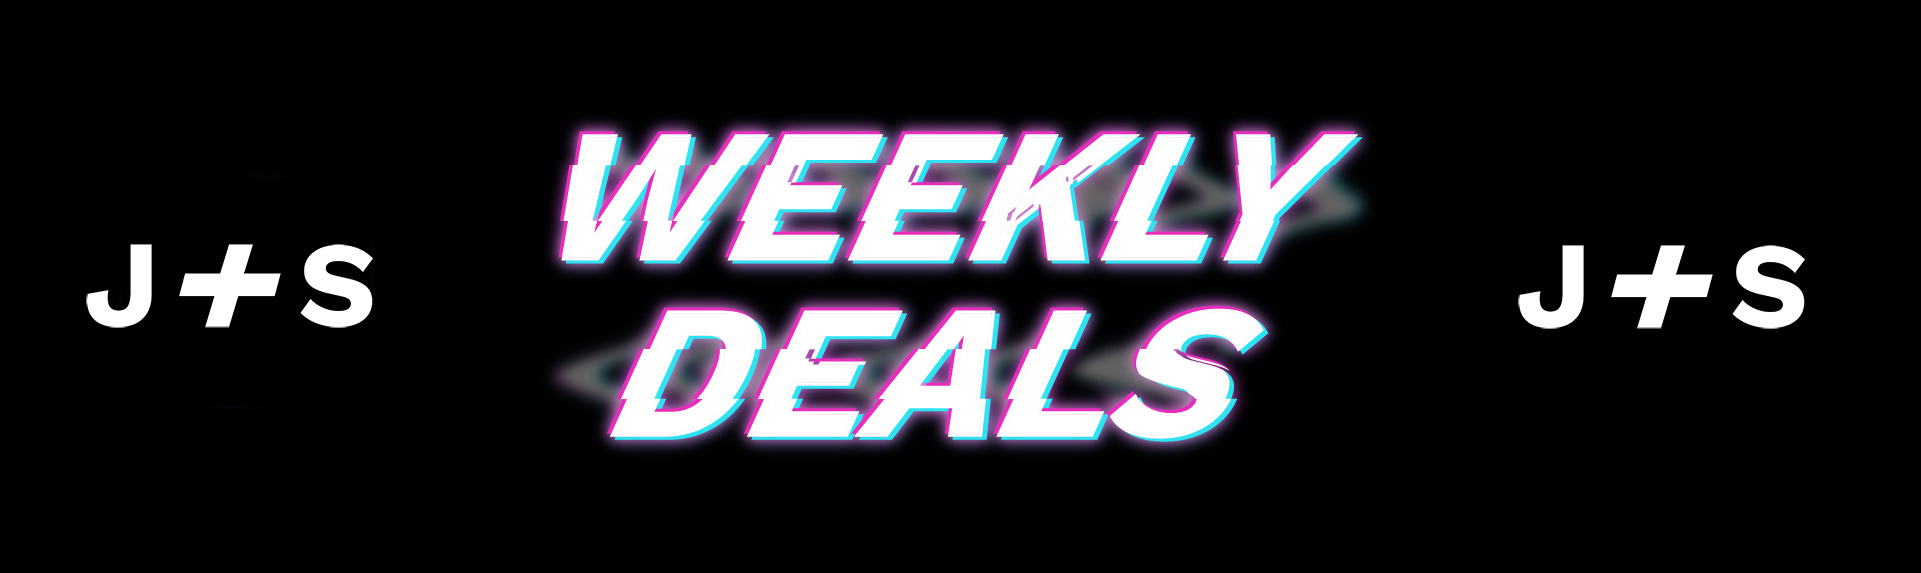 Weekly Deals, Offers, and Limited Sales